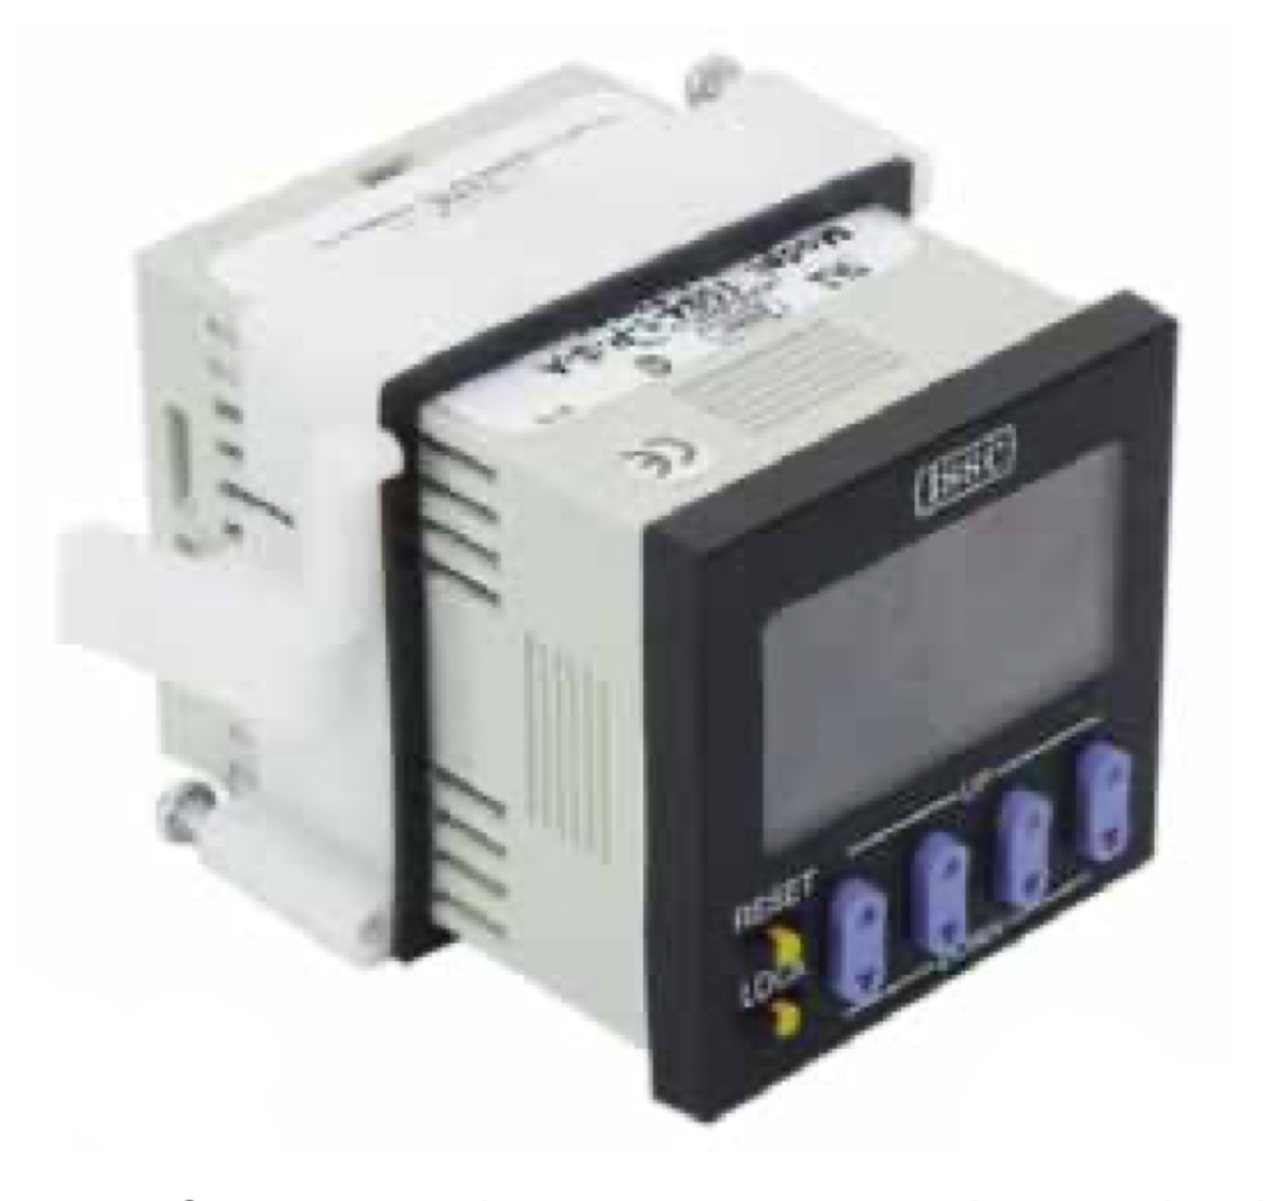 Kanson / ISSC 1094-1-P-3-A Multi-function Timers